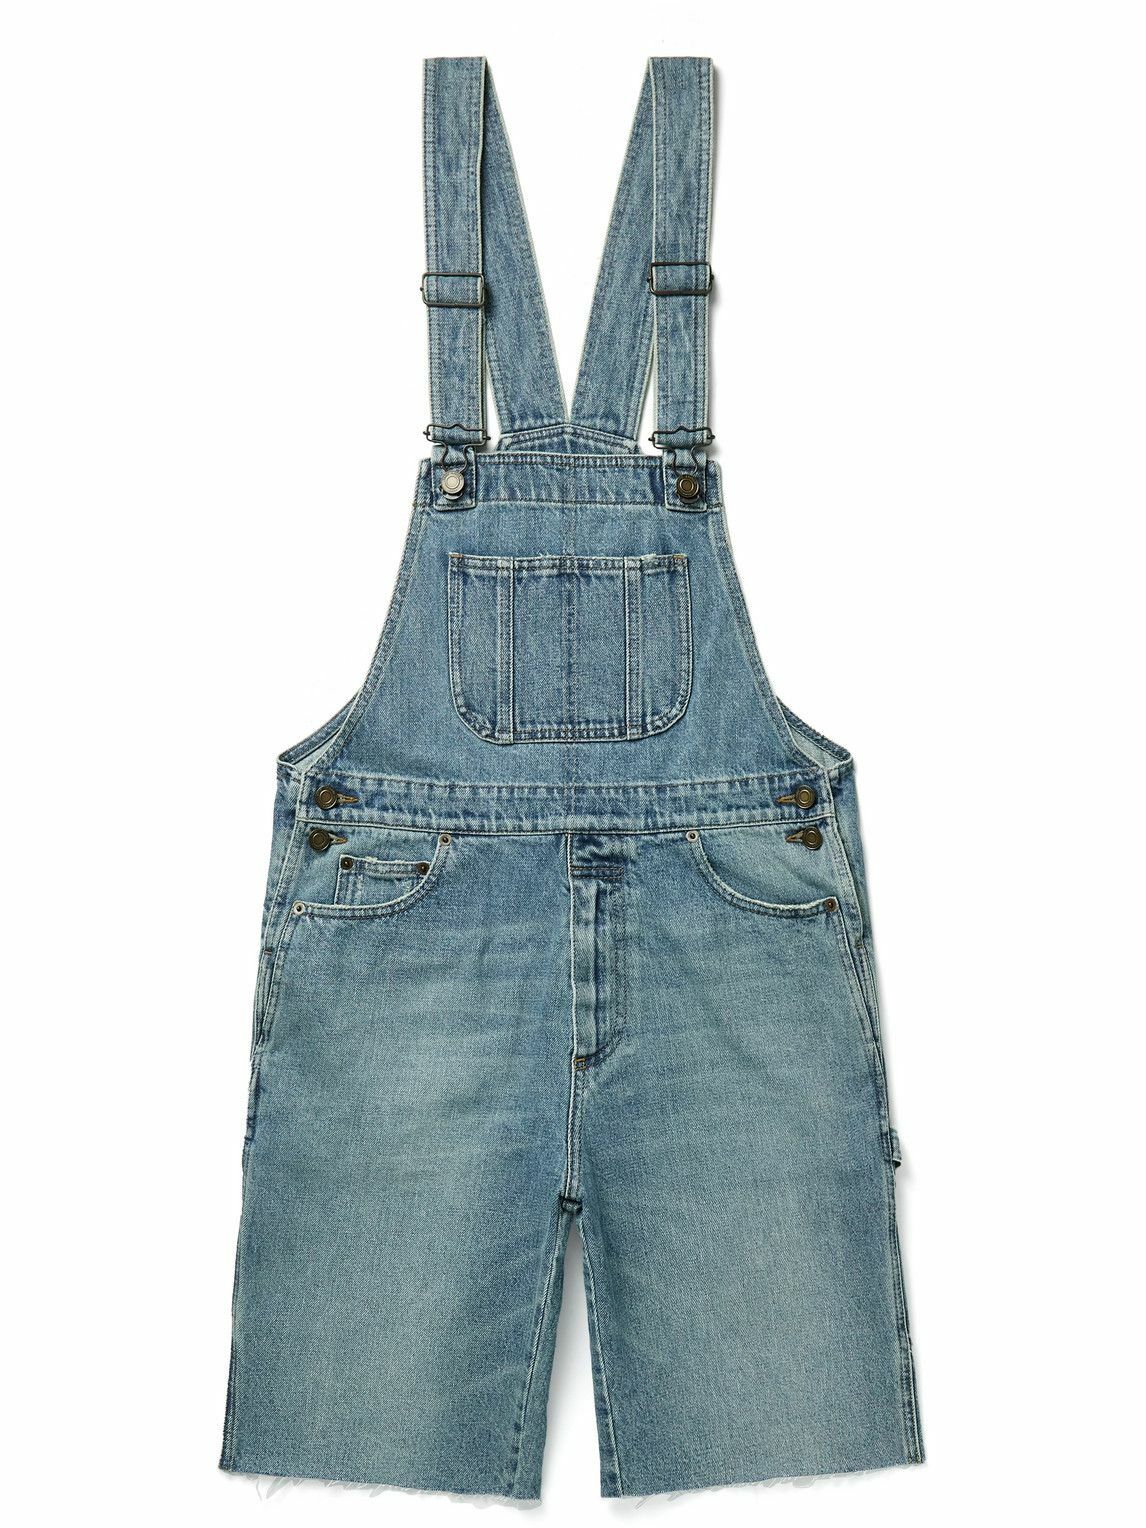 Overalls & Jumpsuits | Search CLOTHBASE